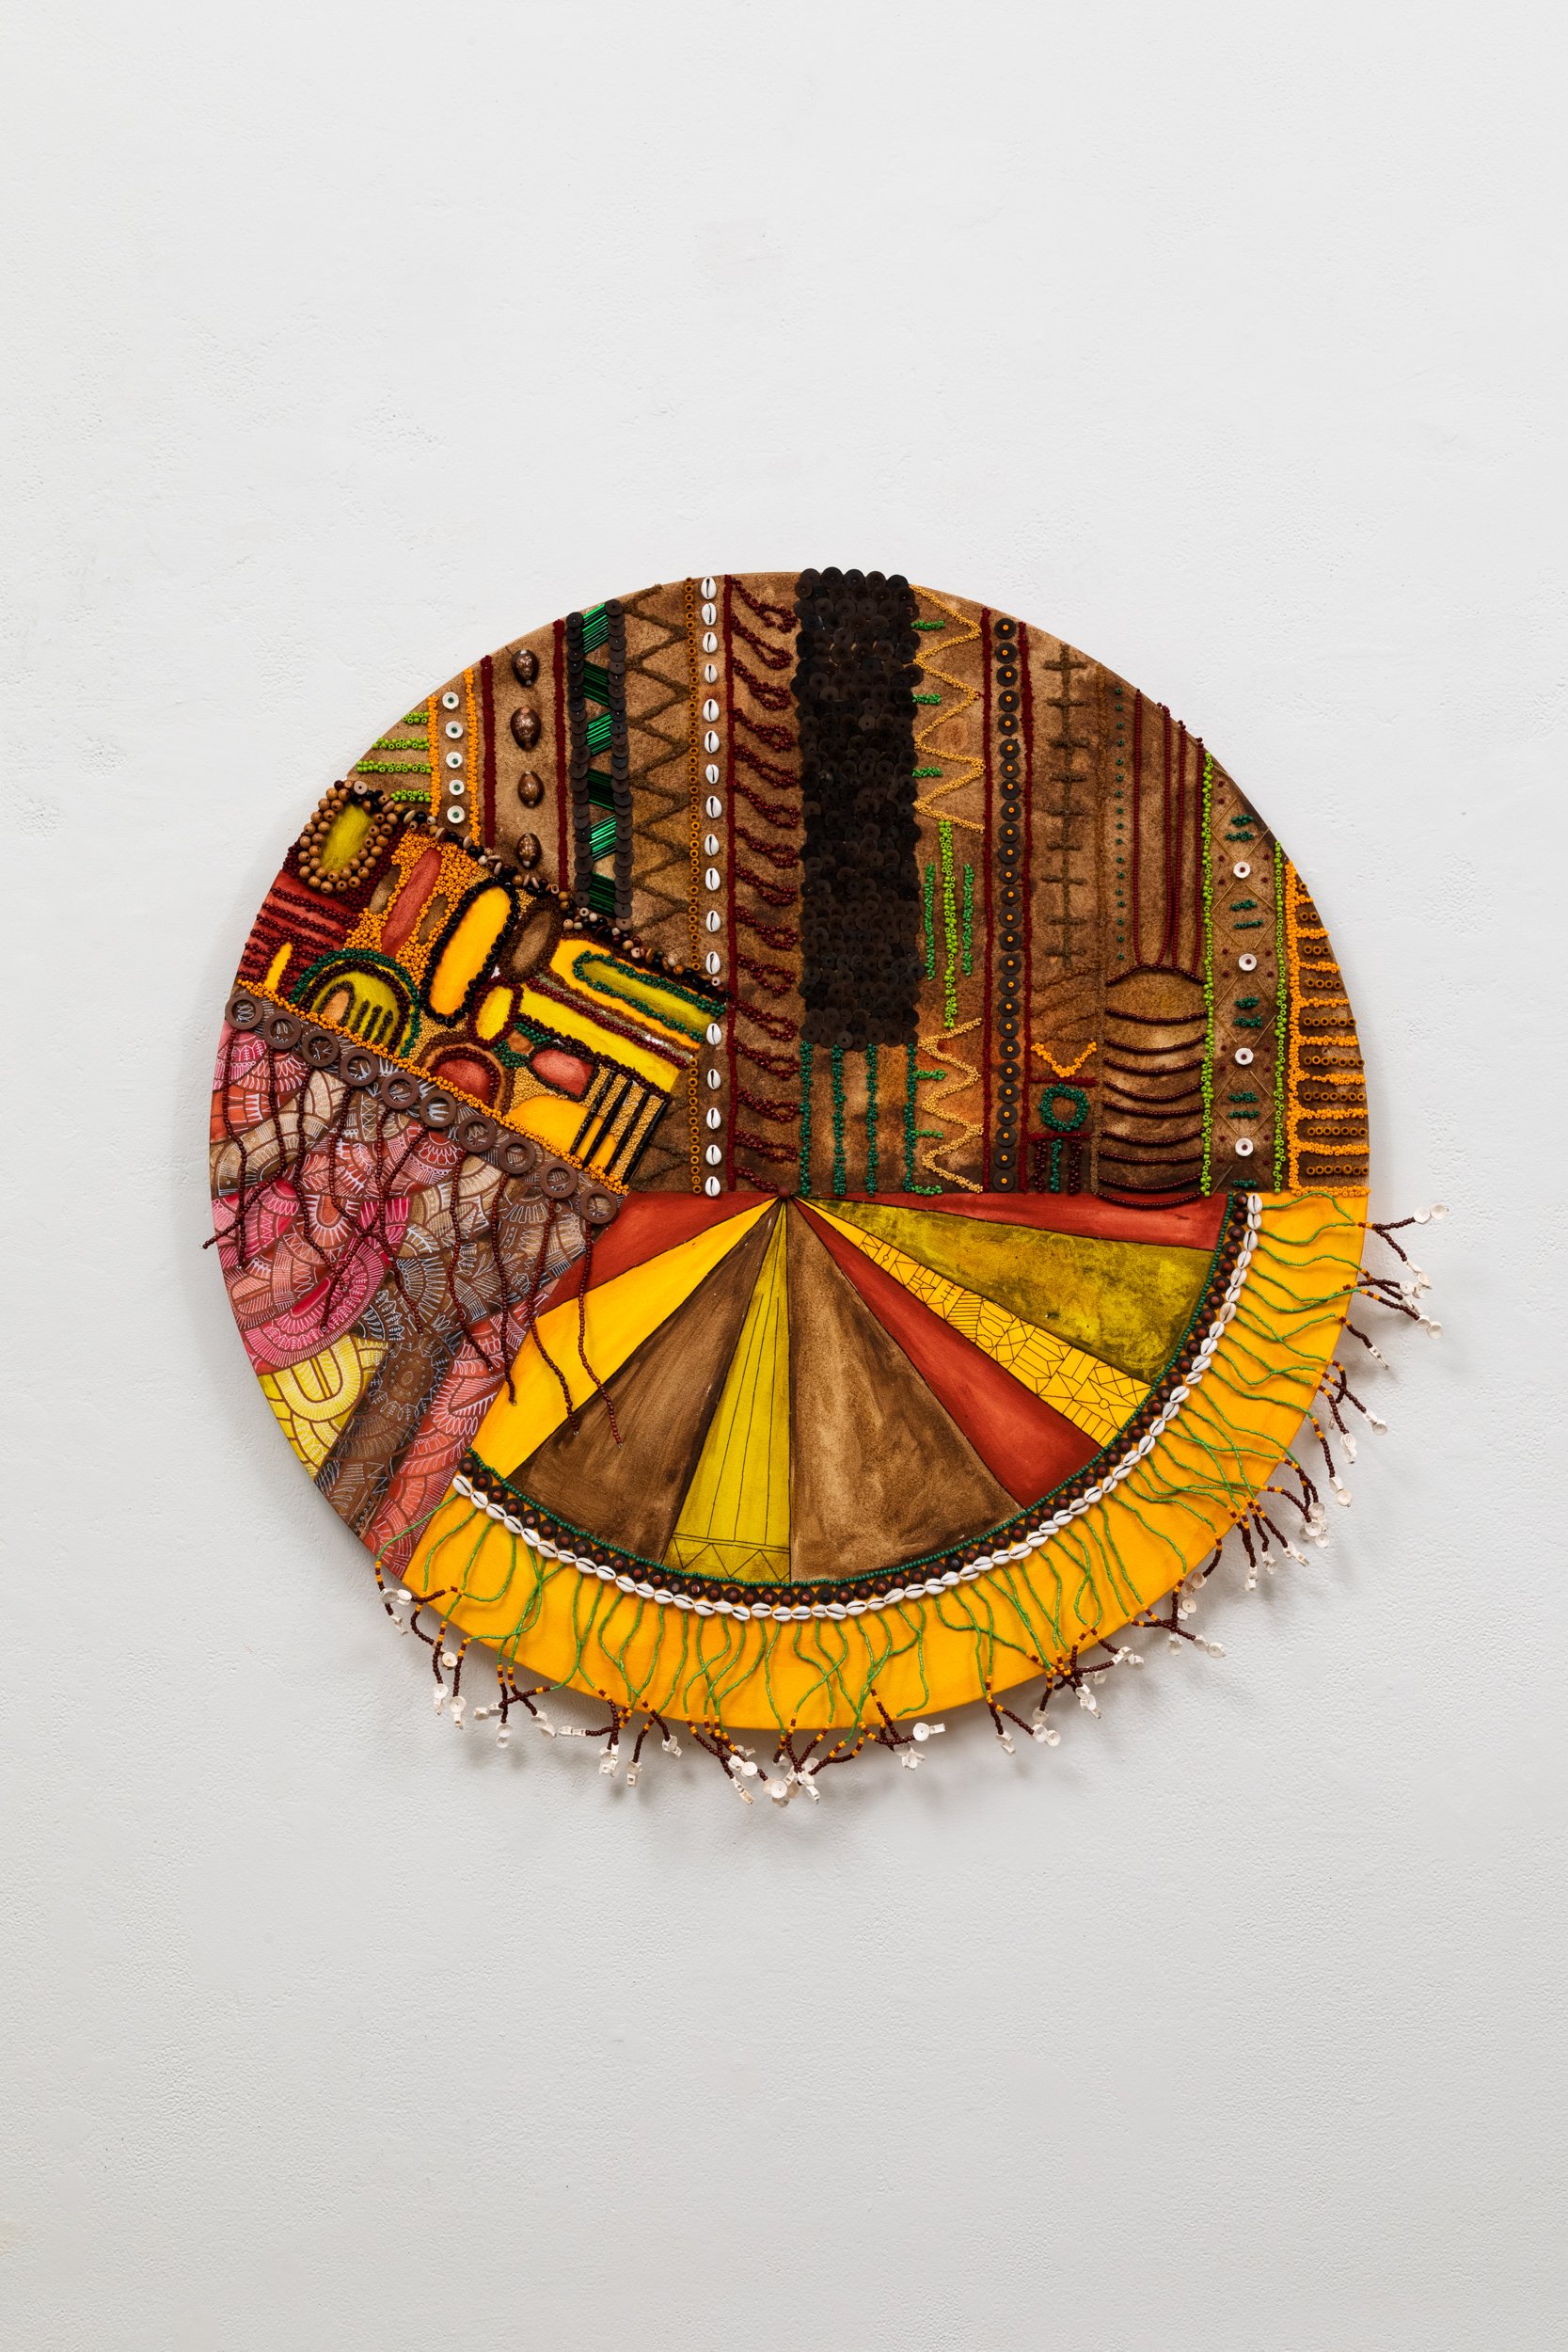  In The Midnight Sun  2023  36 diameter inches  oil,  acrylic, wood, wire, glass seed beads, cowries, African fish bone, African coconut shell, jasper, and cotton thread on cotton canvas 